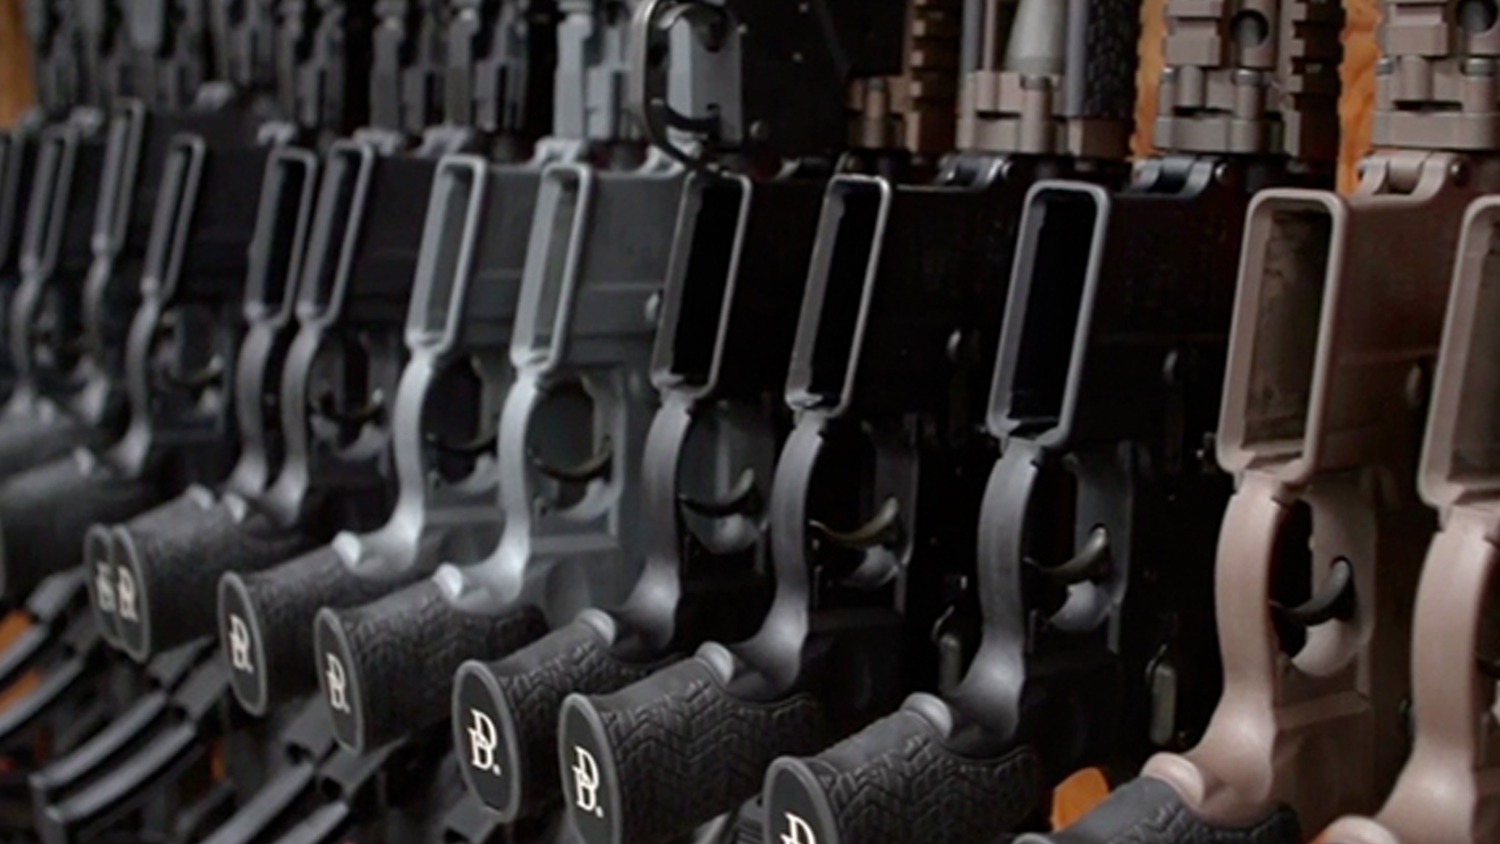 Firearms, Freedom and Family: The Values That Drive Daniel Defense